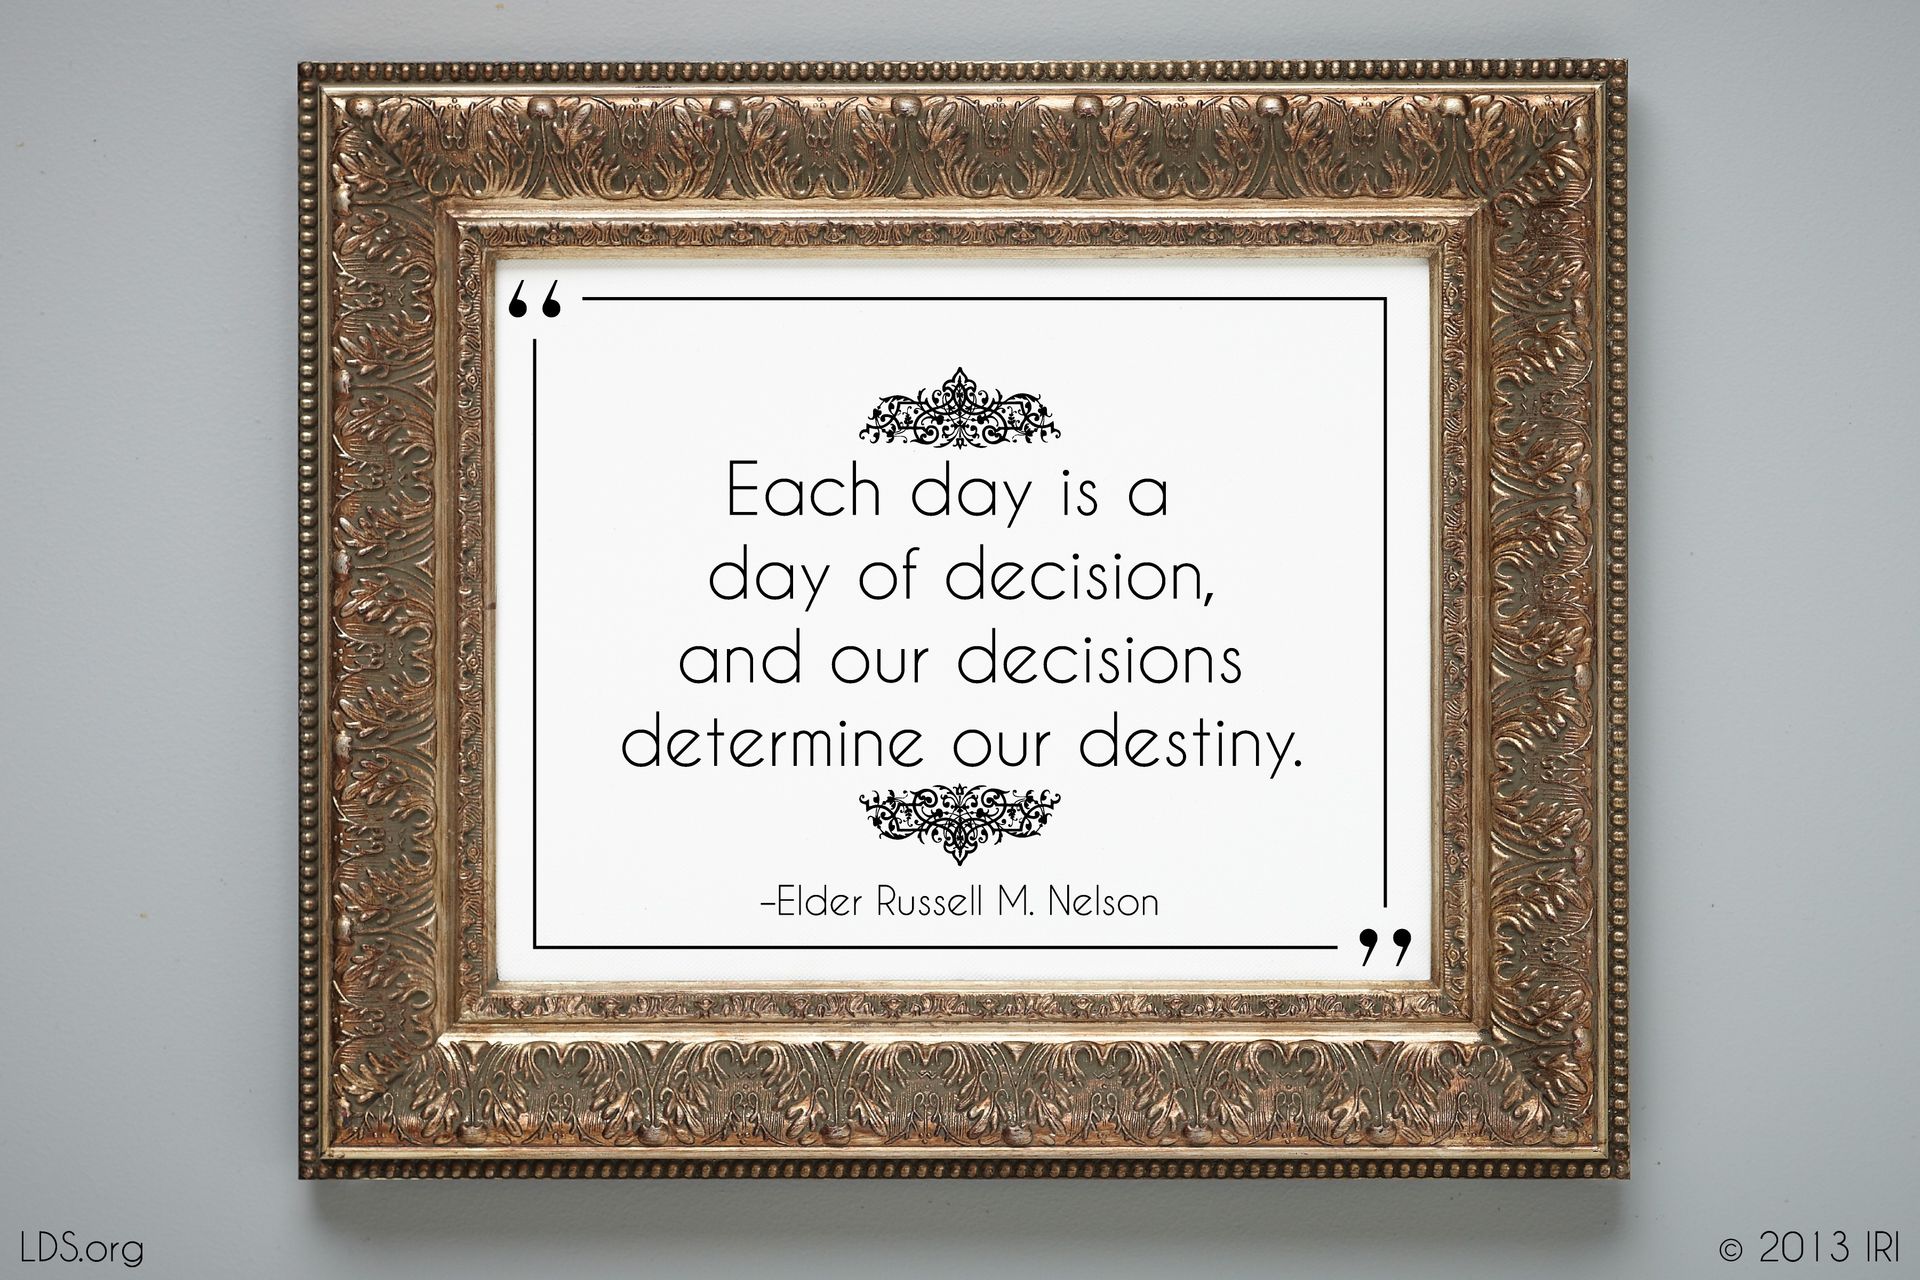 “Each day is a day of decision, and our decisions determine our destiny.”—President Russell M. Nelson, “Decisions for Eternity” © undefined ipCode 1.